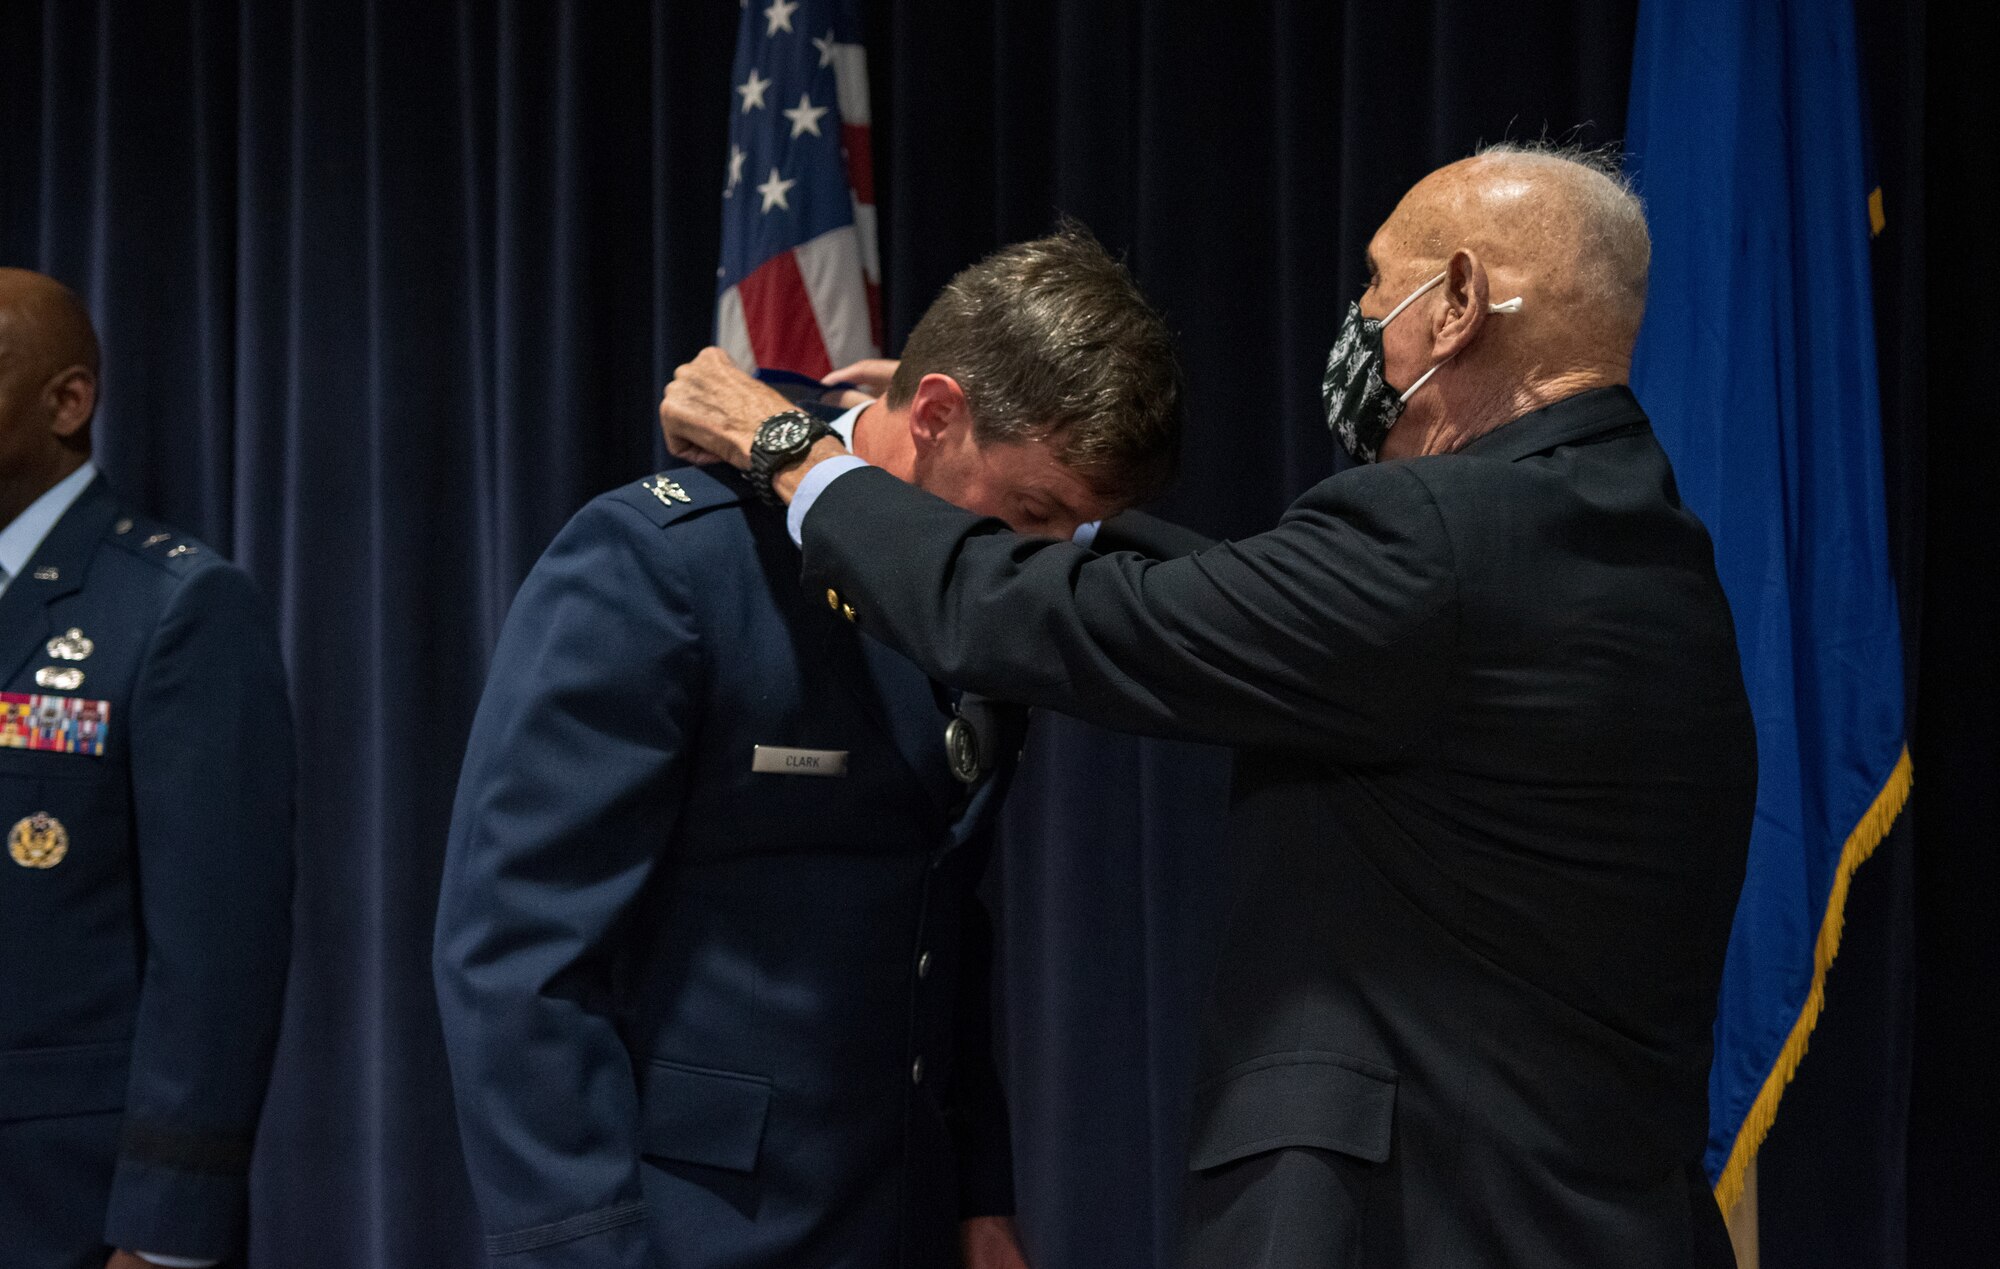 Col. David Clark (left), special projects officer with the Nevada National Guard State Headquarters, is presented the Maj. Gen. Drennan A. Clark Order of Nevada Medal by his father, Maj. Gen. (ret.) Drennan Clark (right) during a ceremony at the Nevada Air National Guard Base.